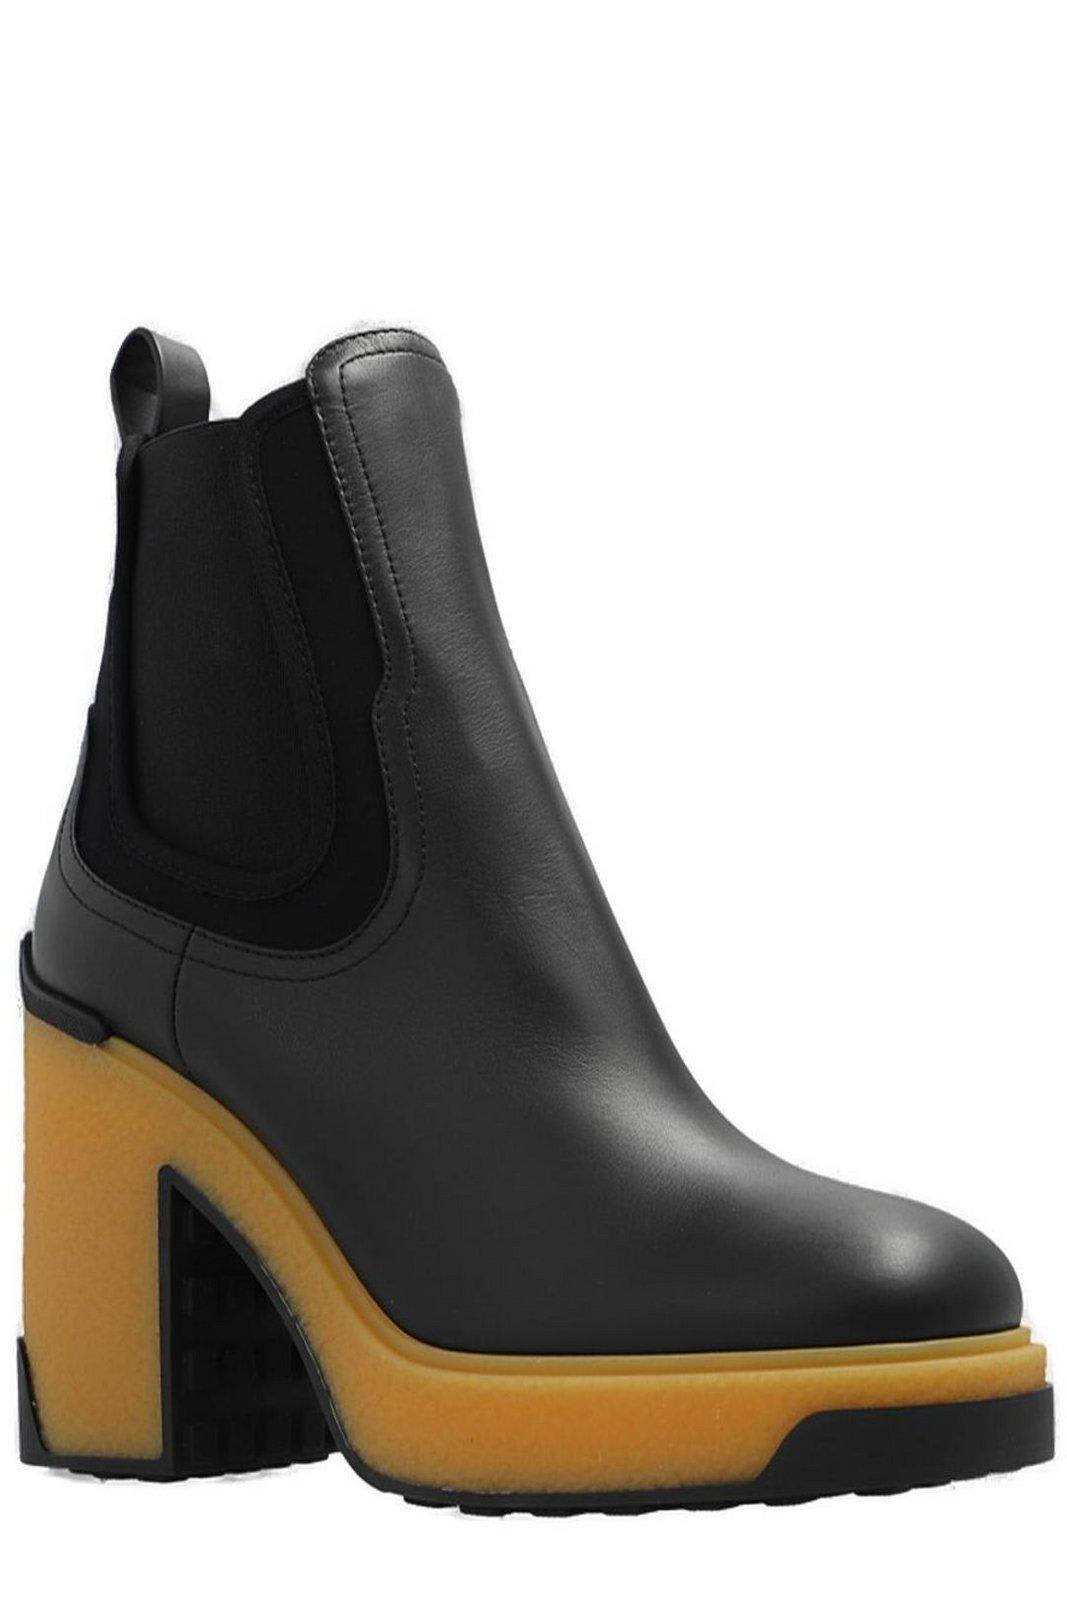 Moncler Isla Heeled Ankle Boots